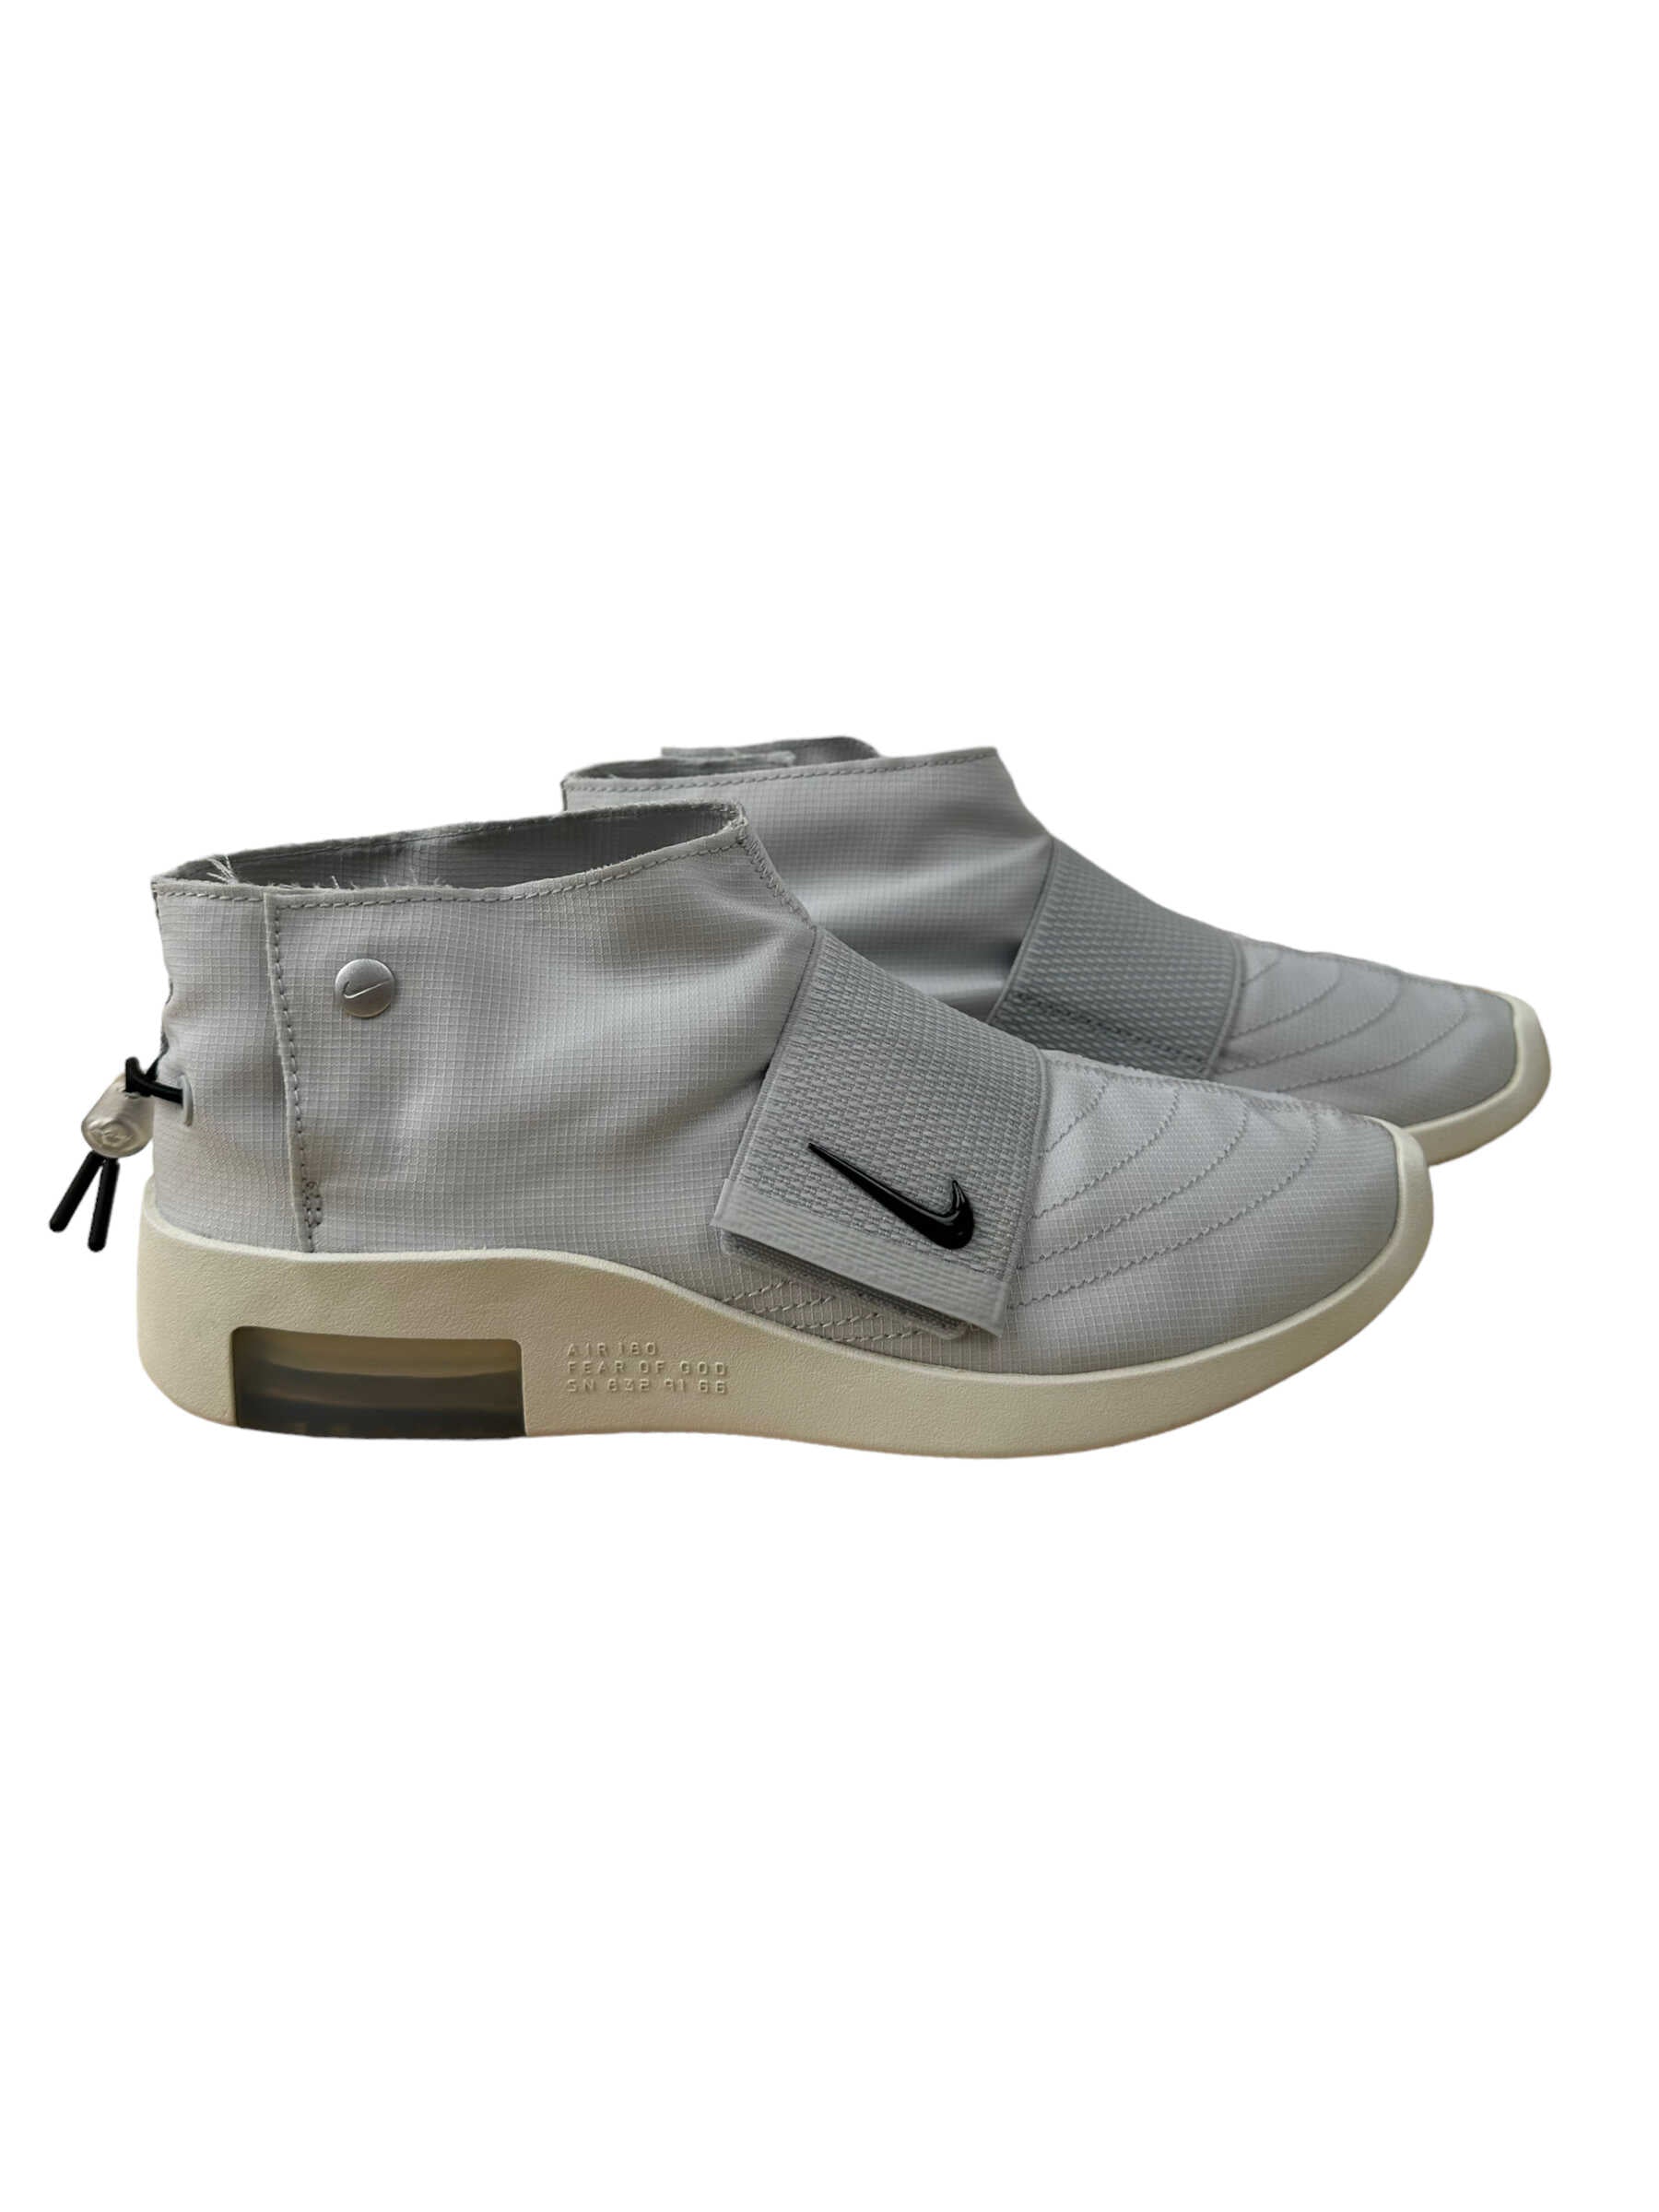 Nike Air Fear Of God Pure Platinum Moccasin Sneakers